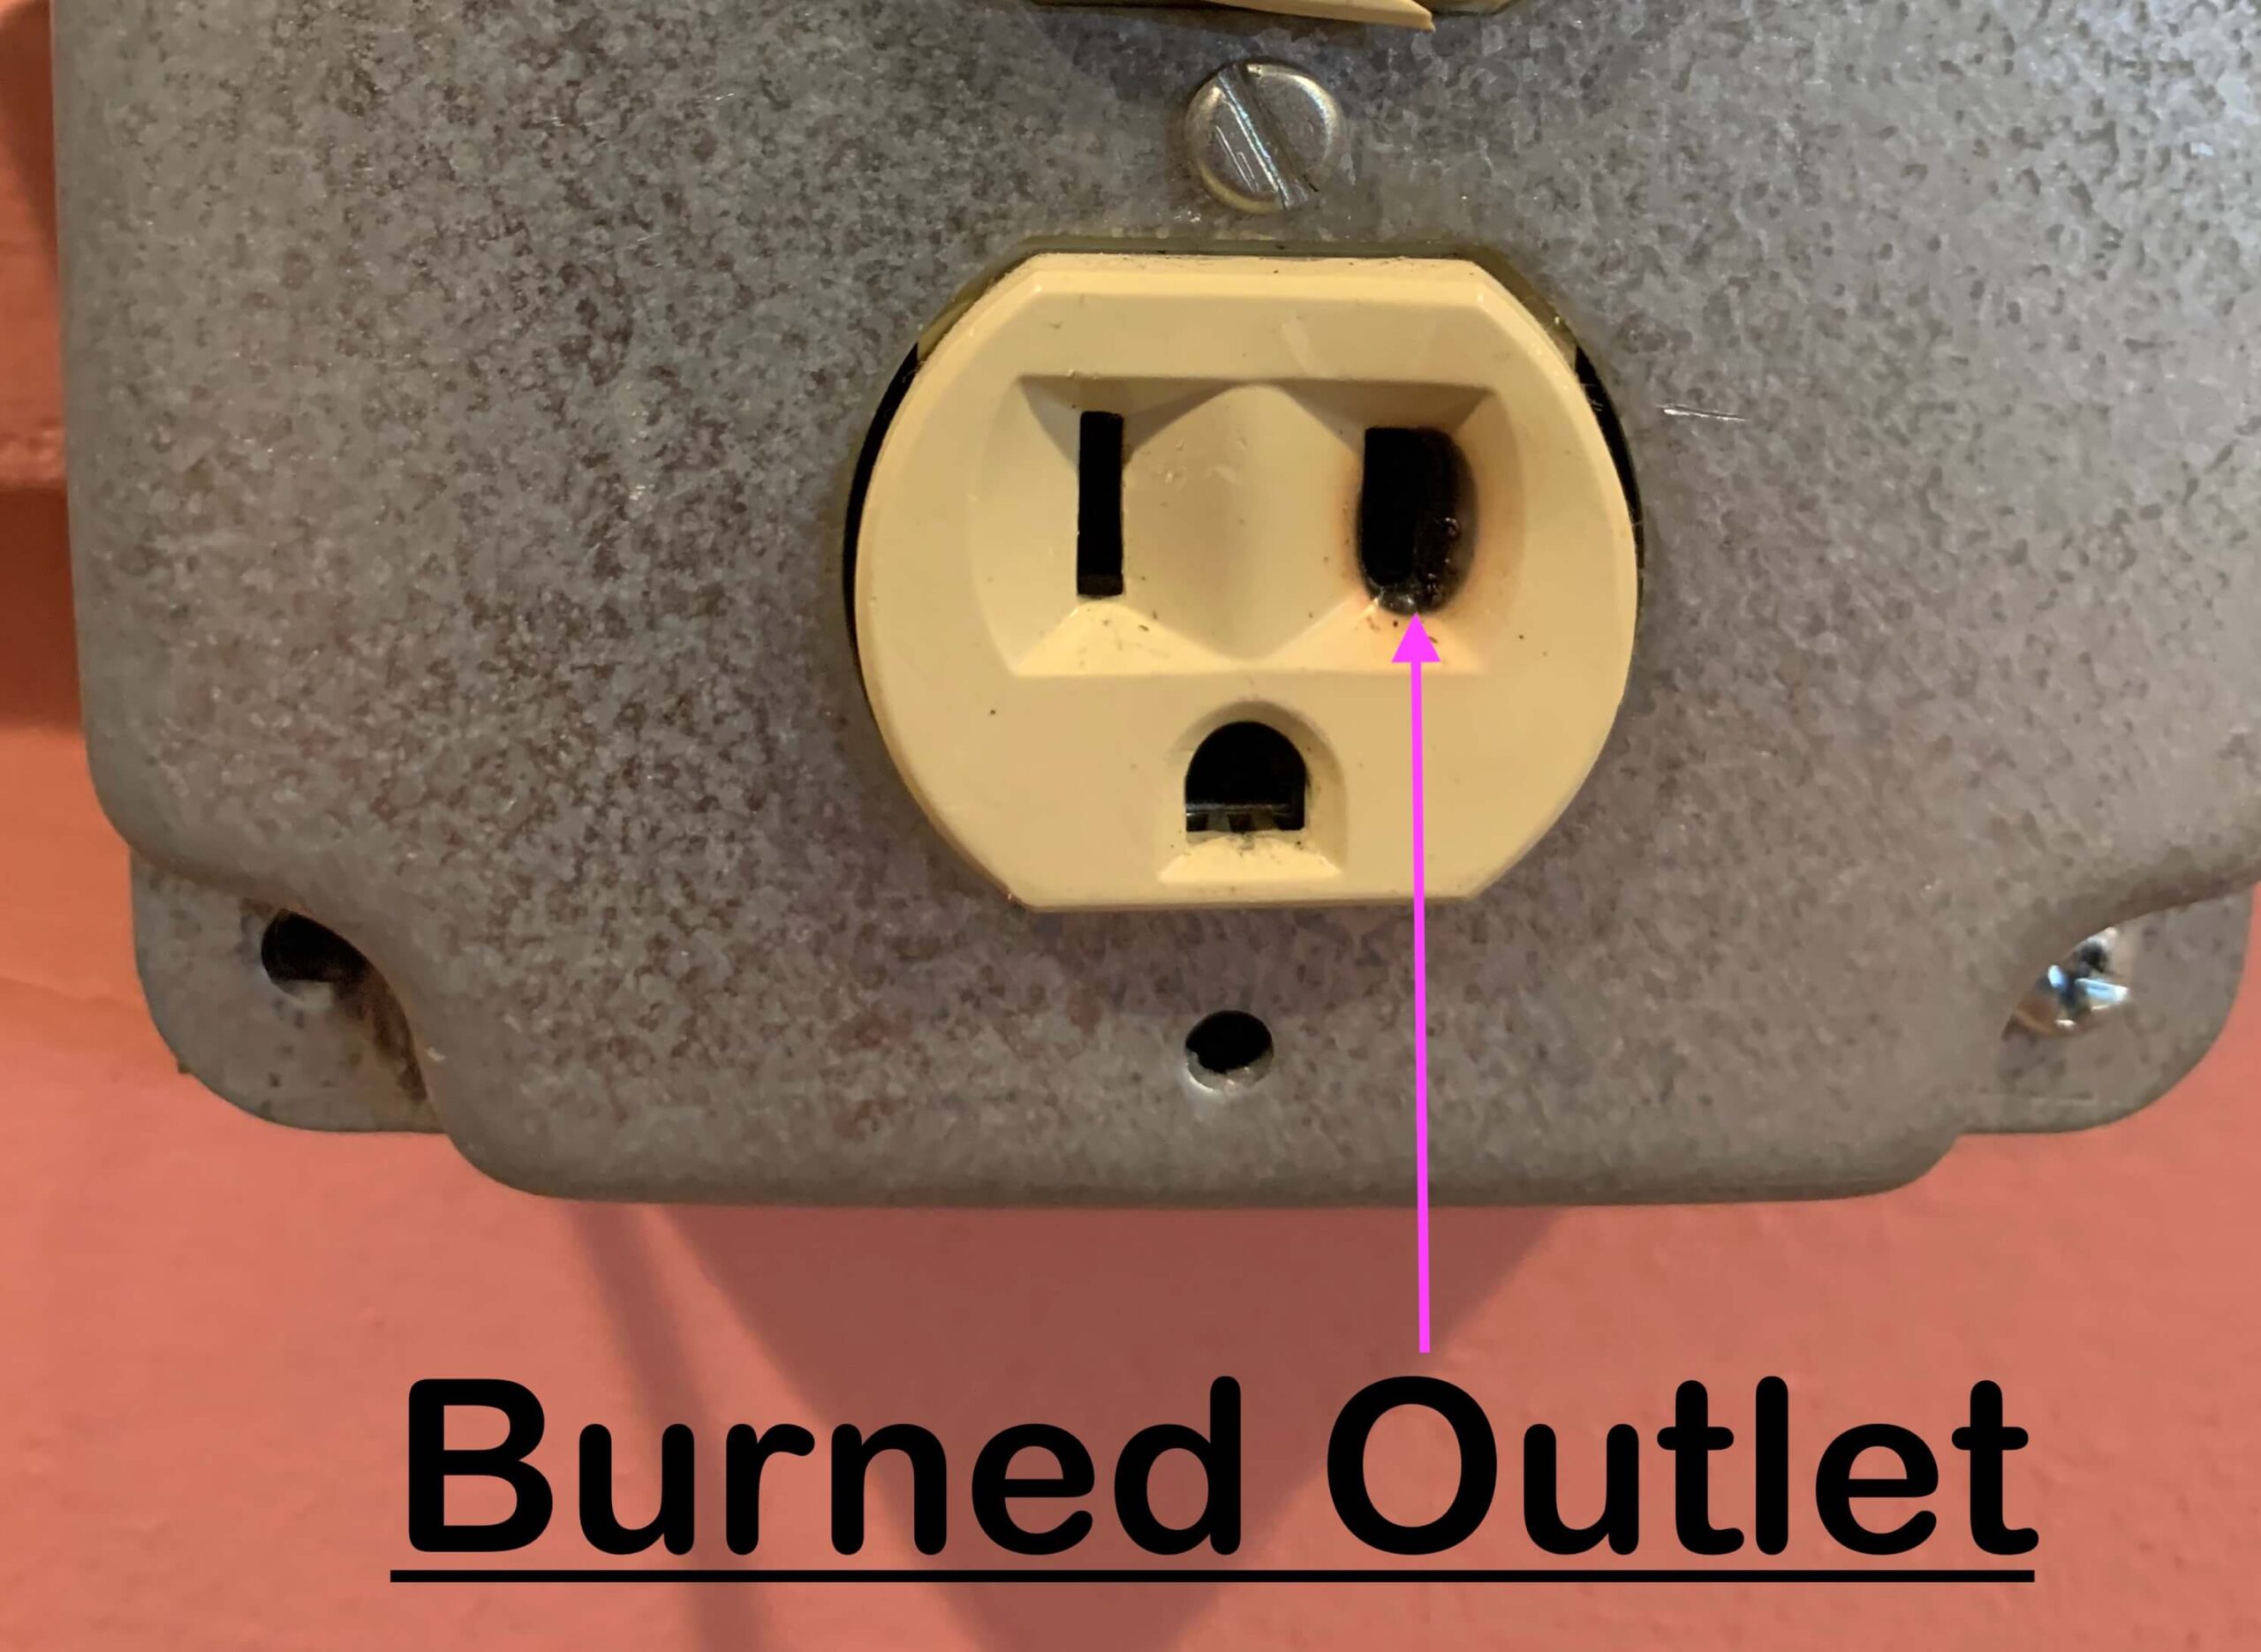 Burned Outlet - What to do? 